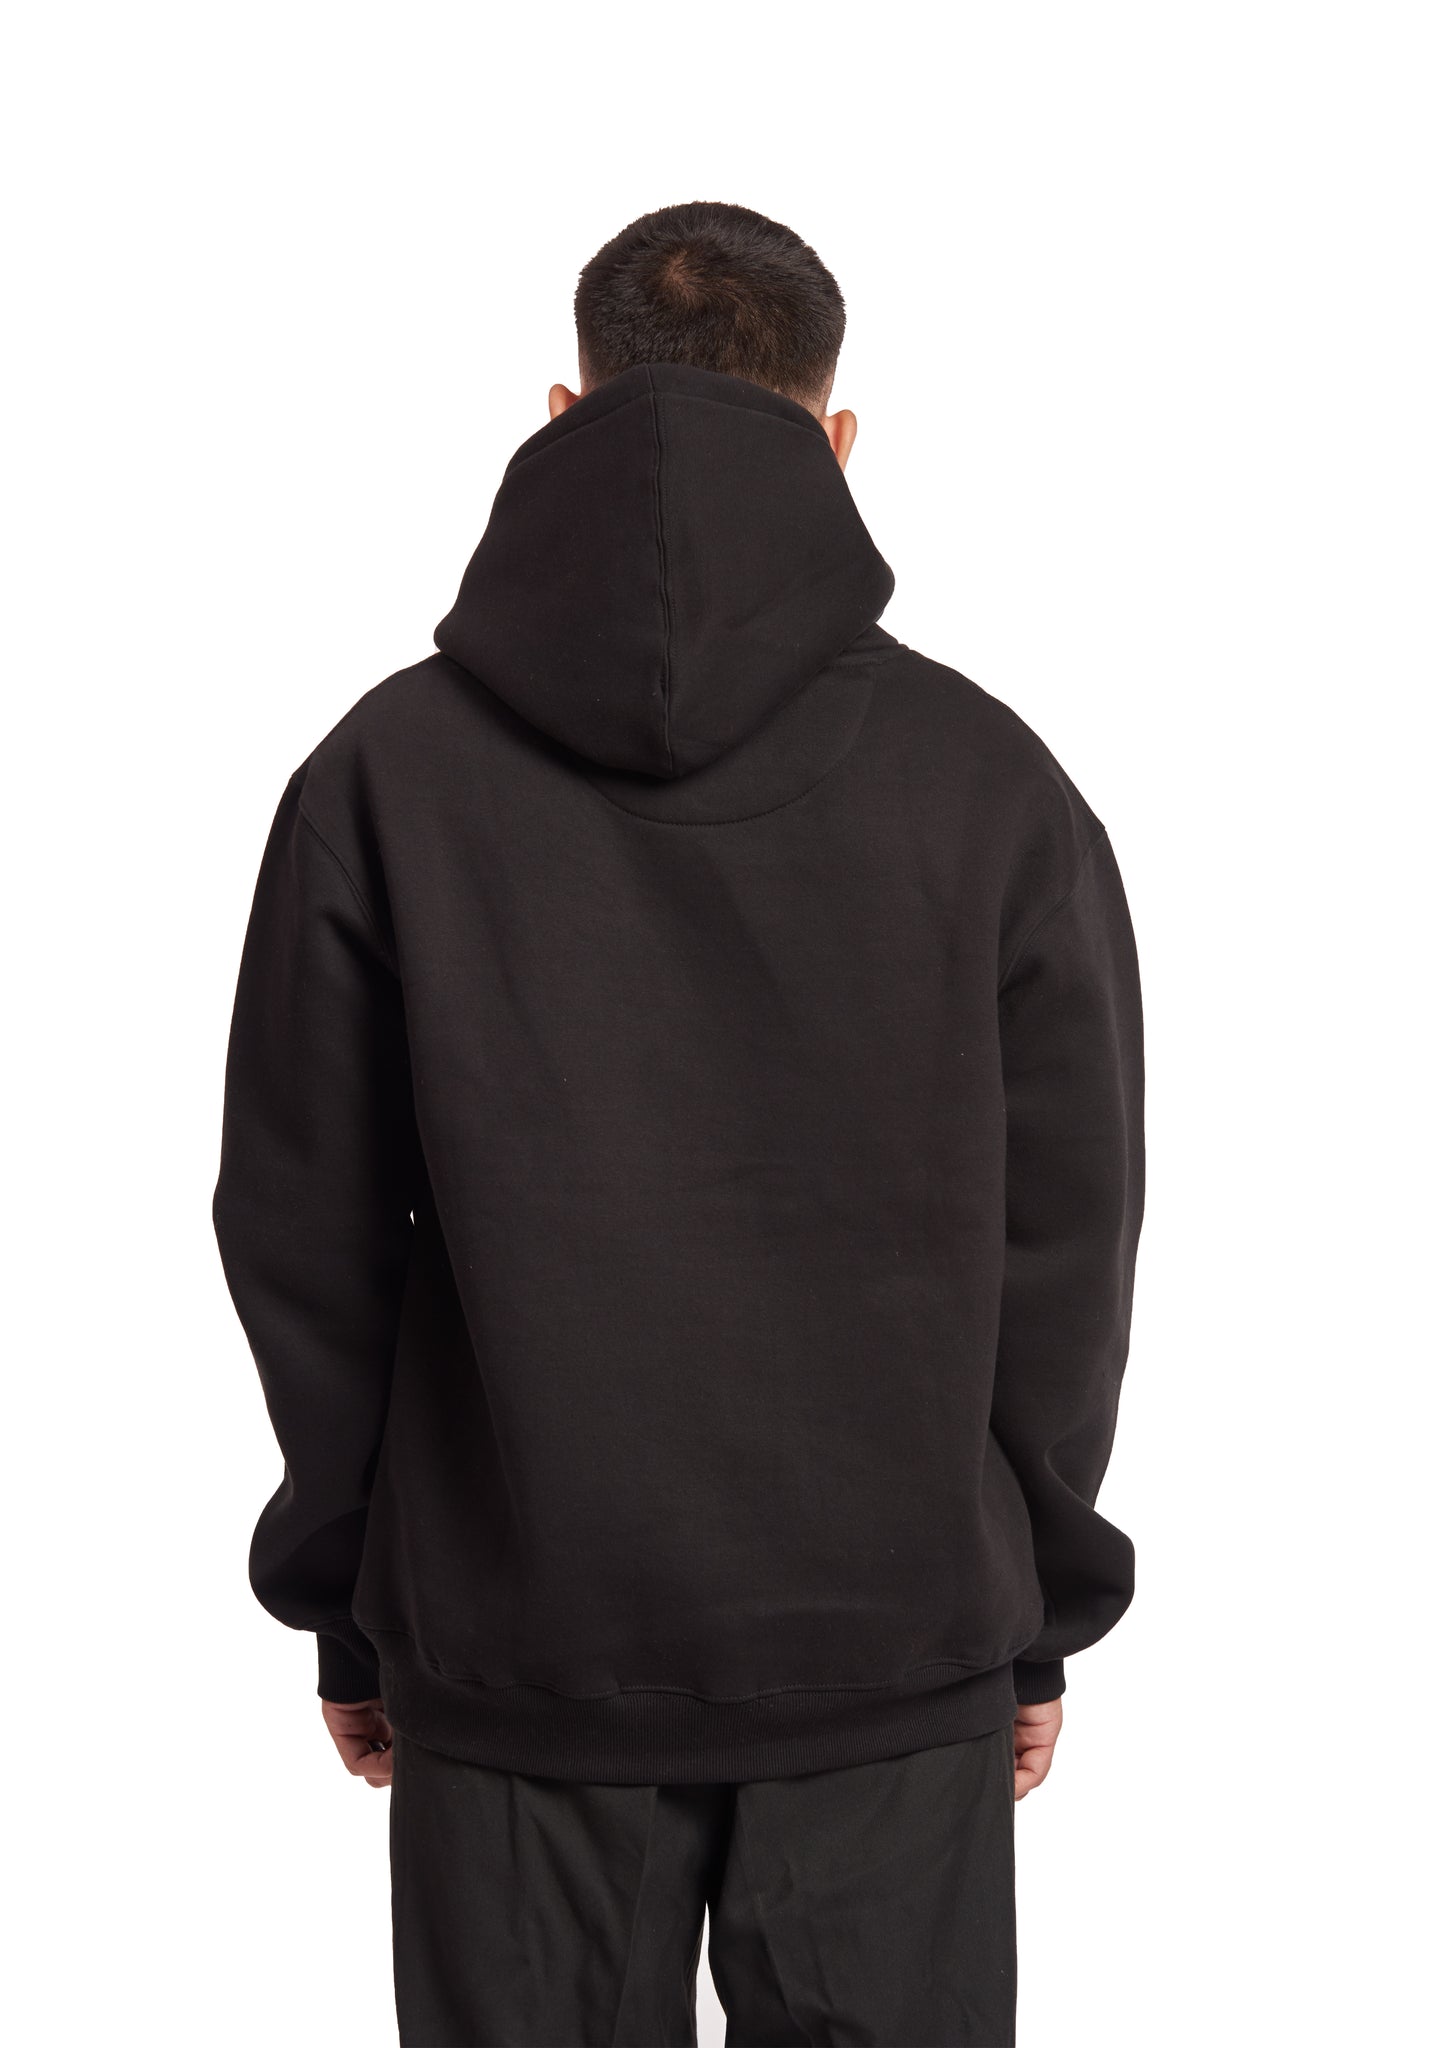 Are You Afraid of The Dark  Reflective Hoodie (BLACK)